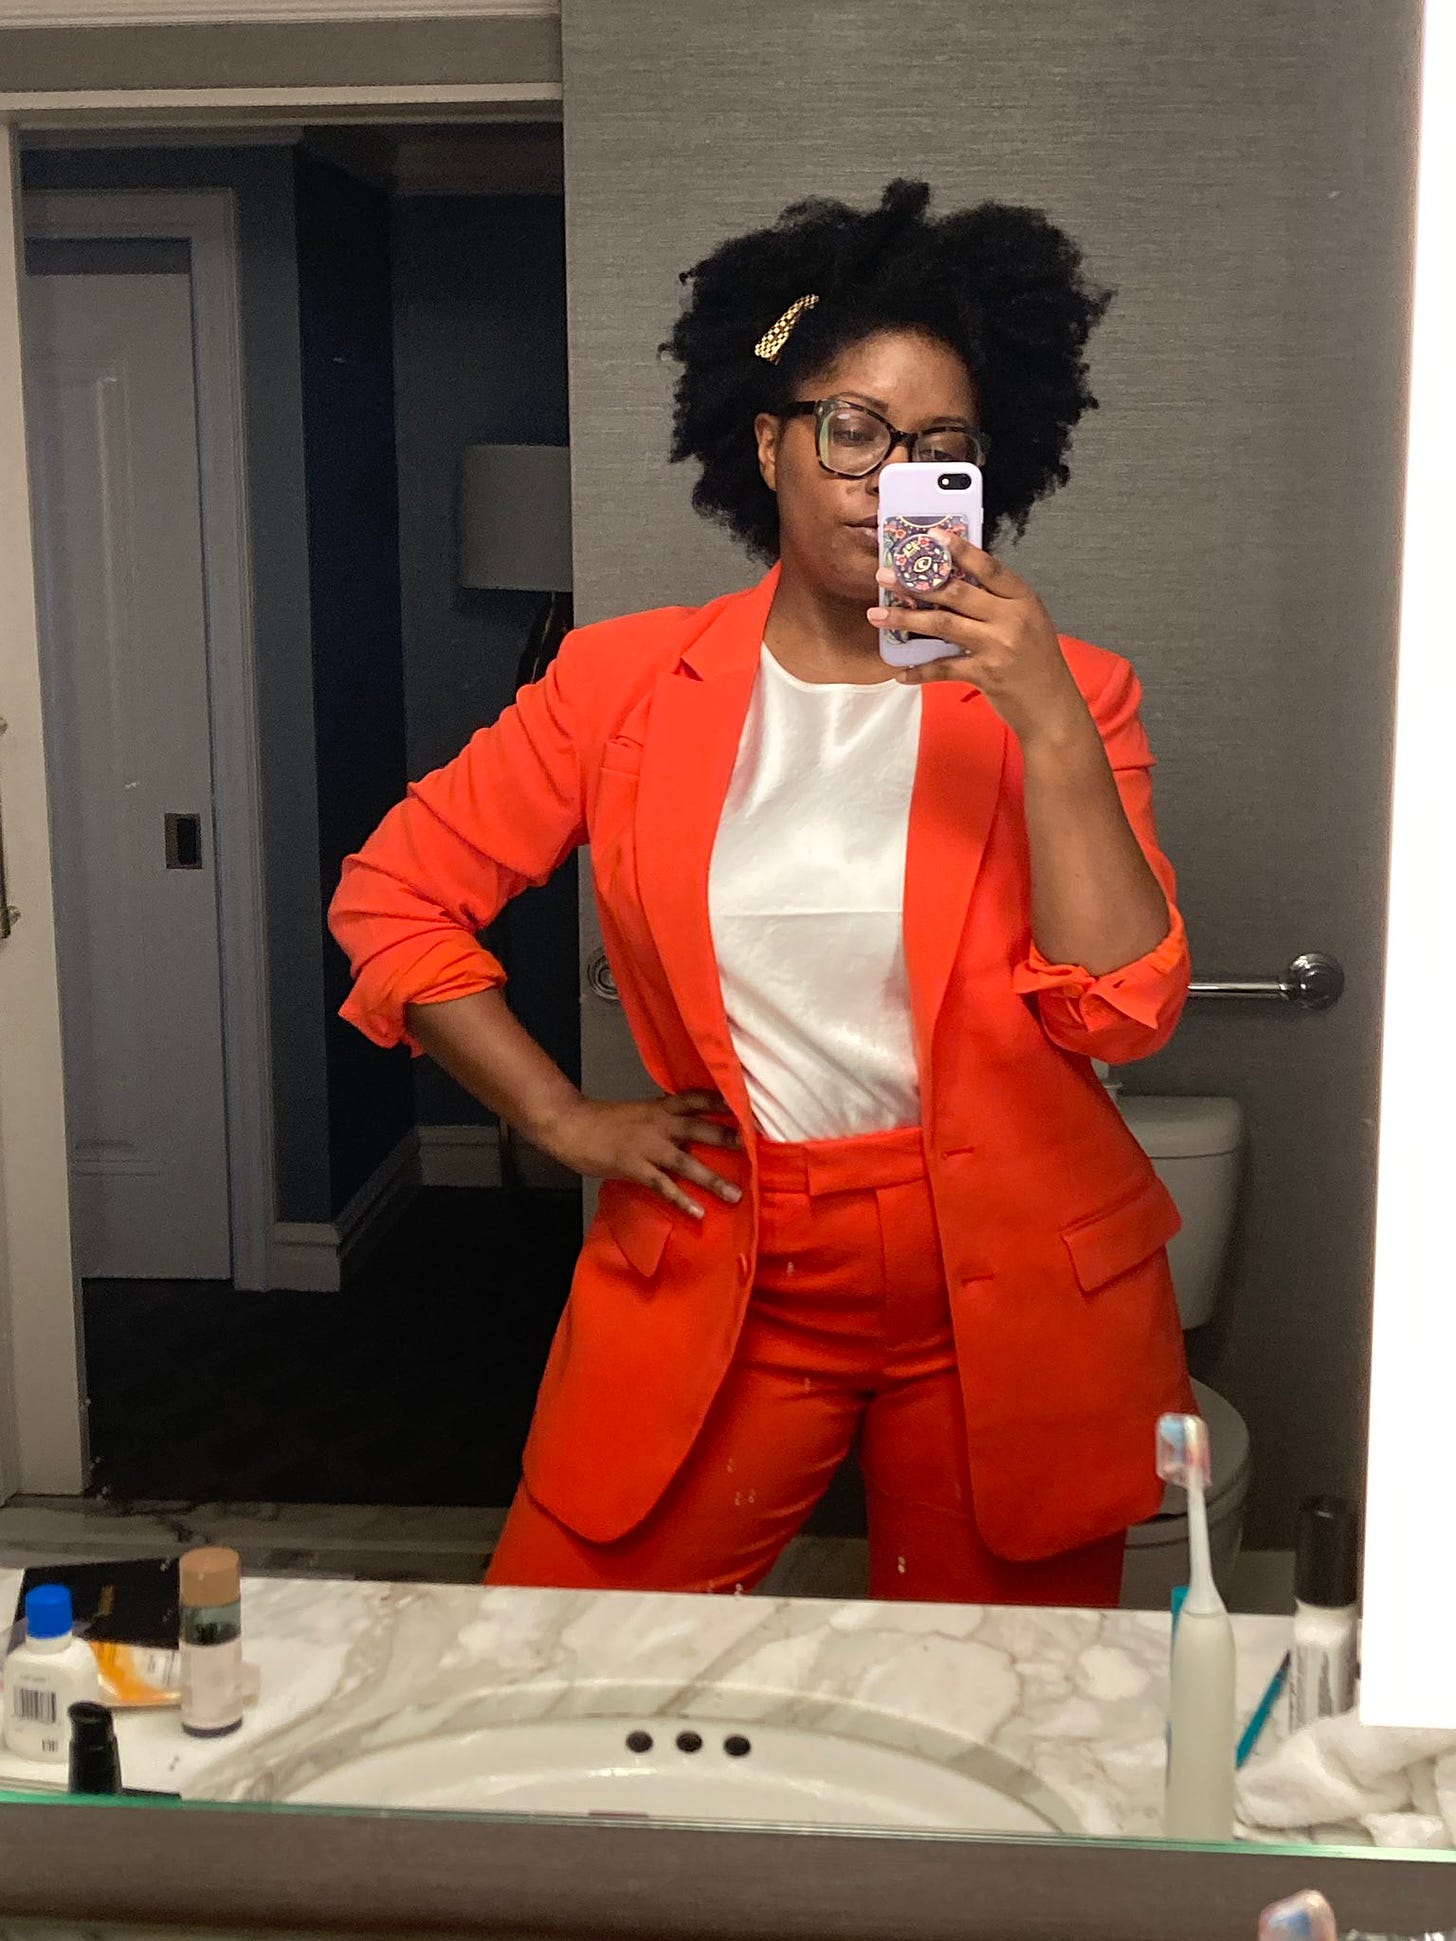 Black woman with a fro and glasses wearing a bright orange suit and satin white shirt taking a selfie in a bathroom mirror.